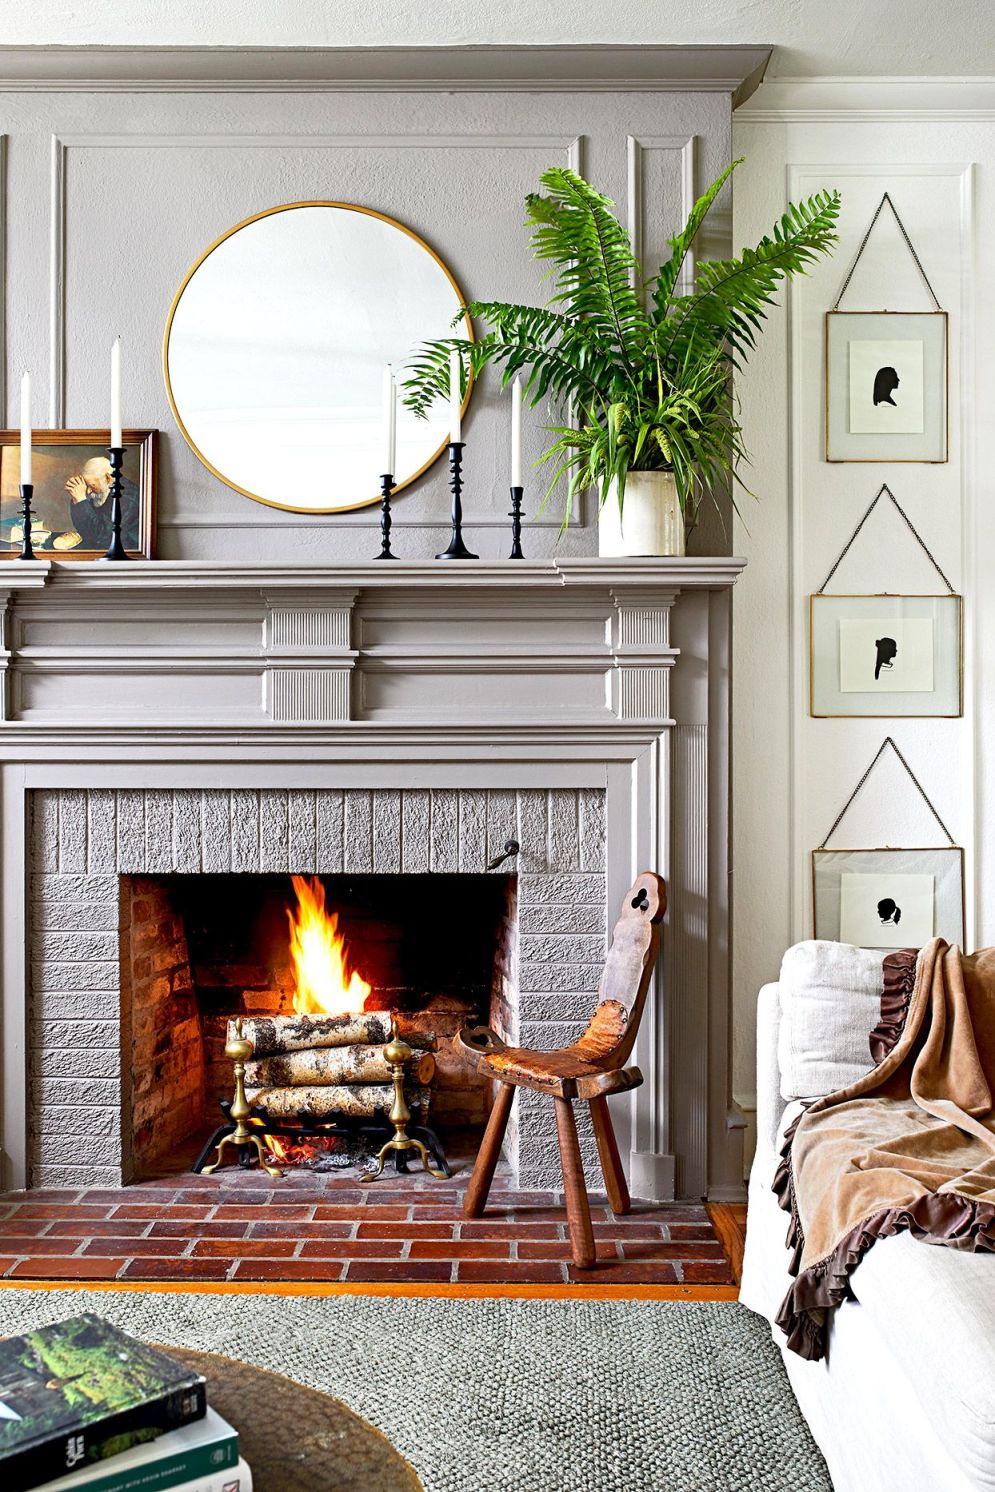 Mantel Decor Ideas That Make Your Fireplace a Focal Point